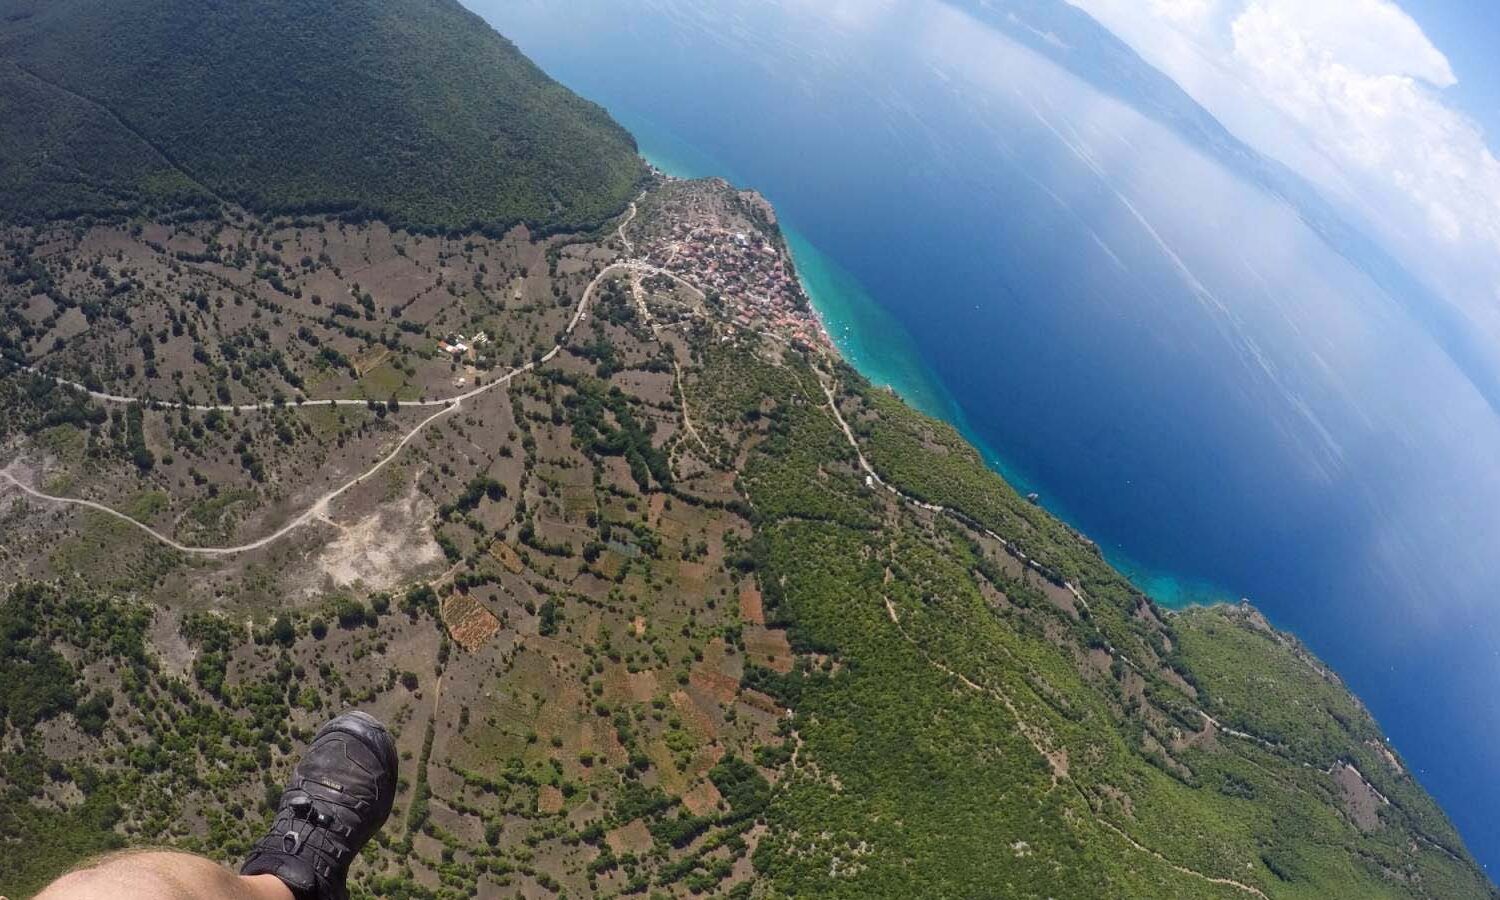 View from paraglider above Trpejca Ohrid